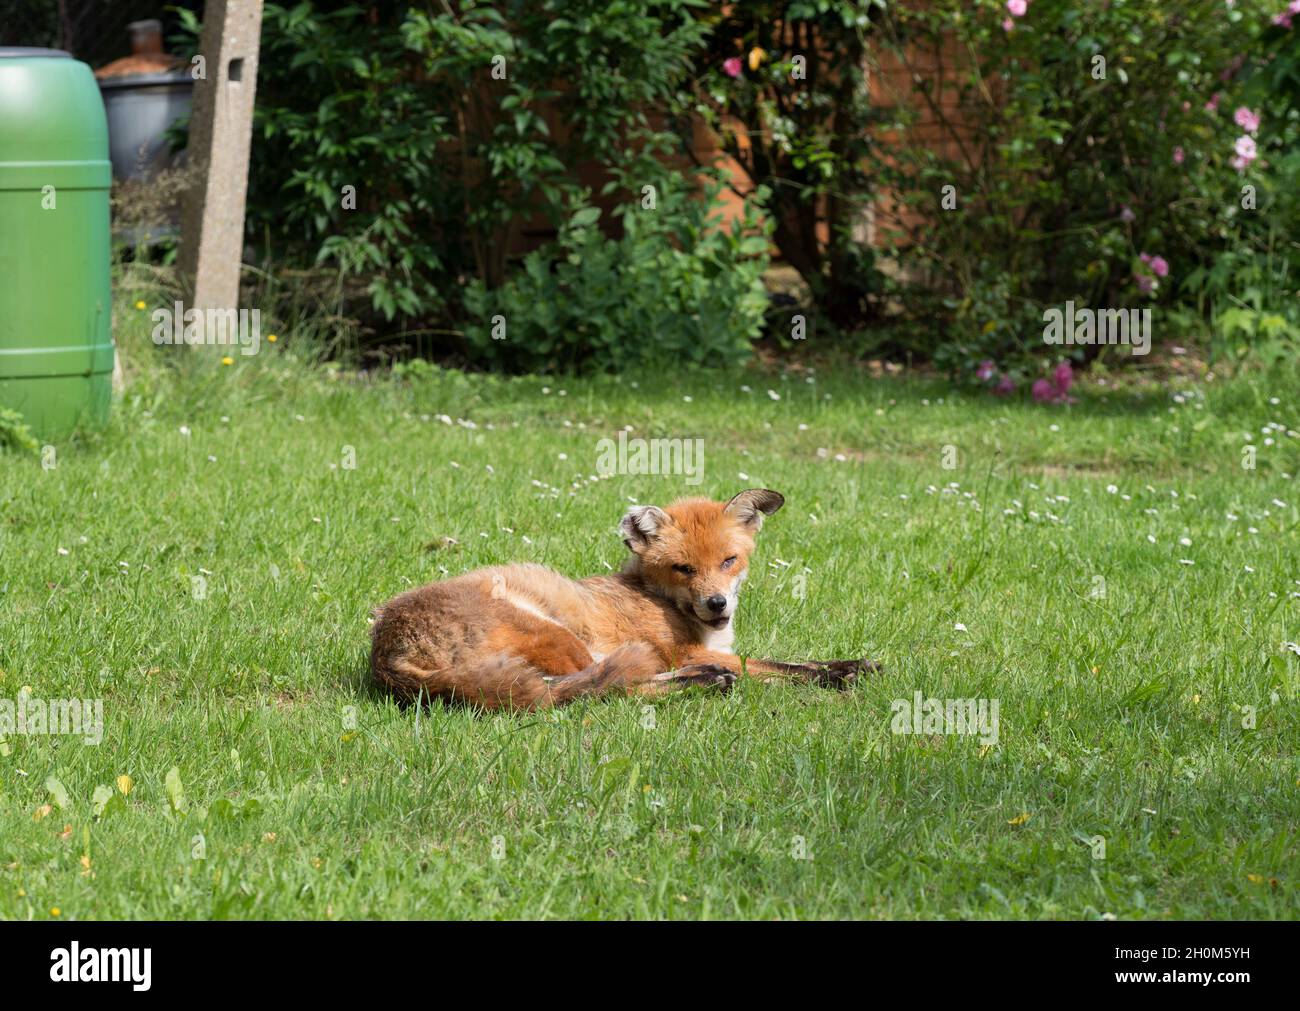 Red Fox, Vulpes vulpes, single adult male, resting in urban garden during day. Lea Valley, Essex, UK. Stock Photo